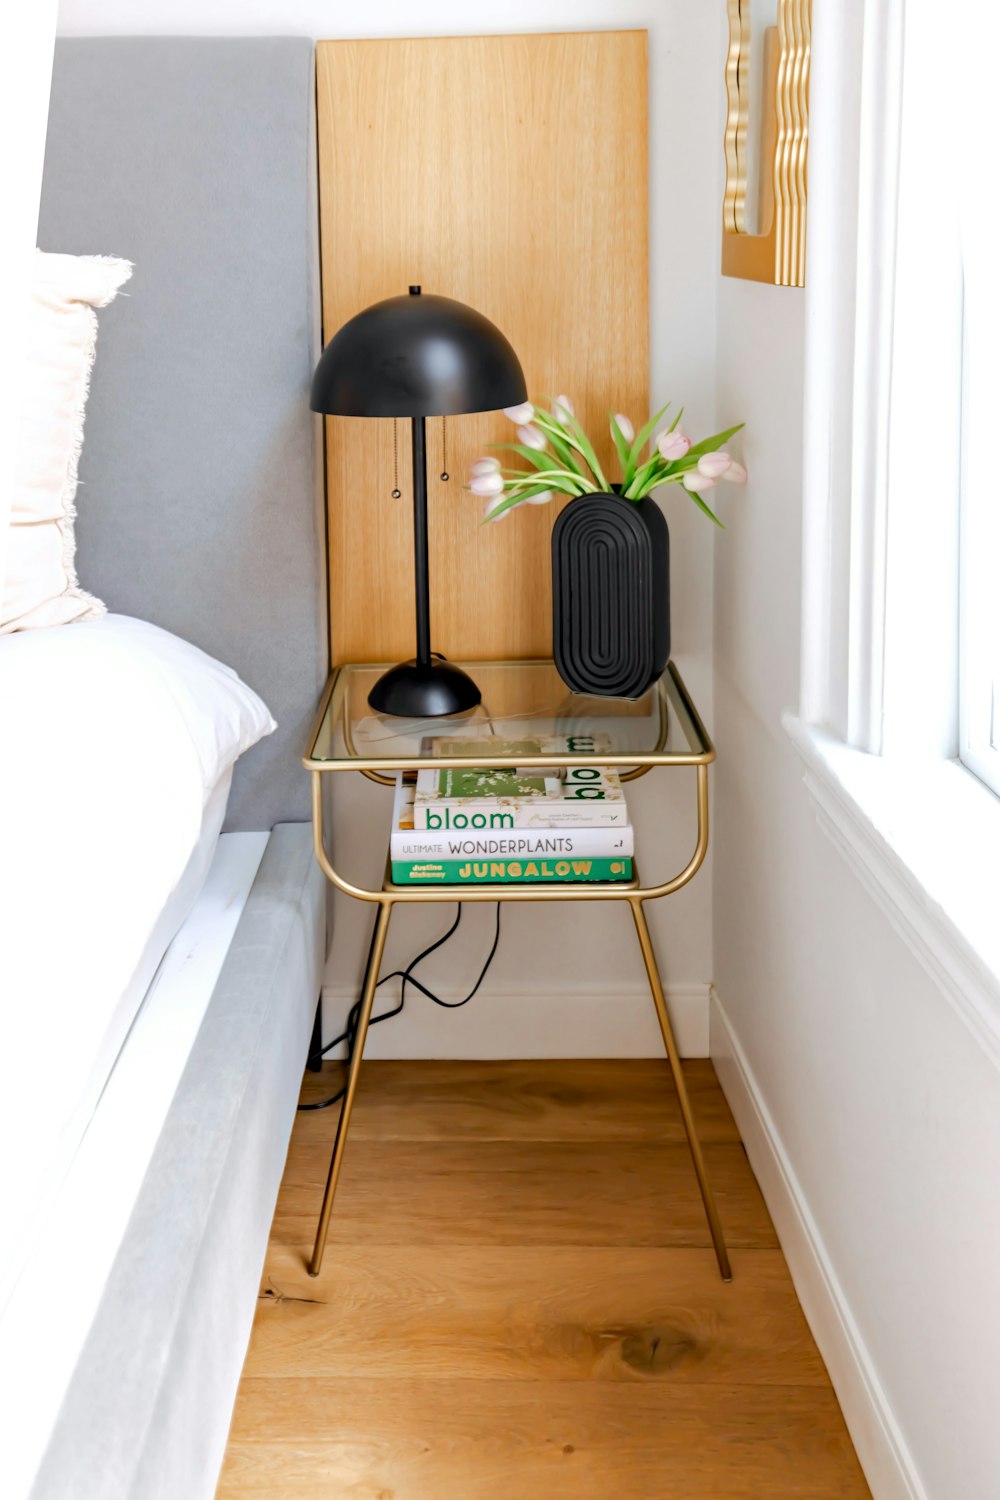 a nightstand with a lamp and books on it